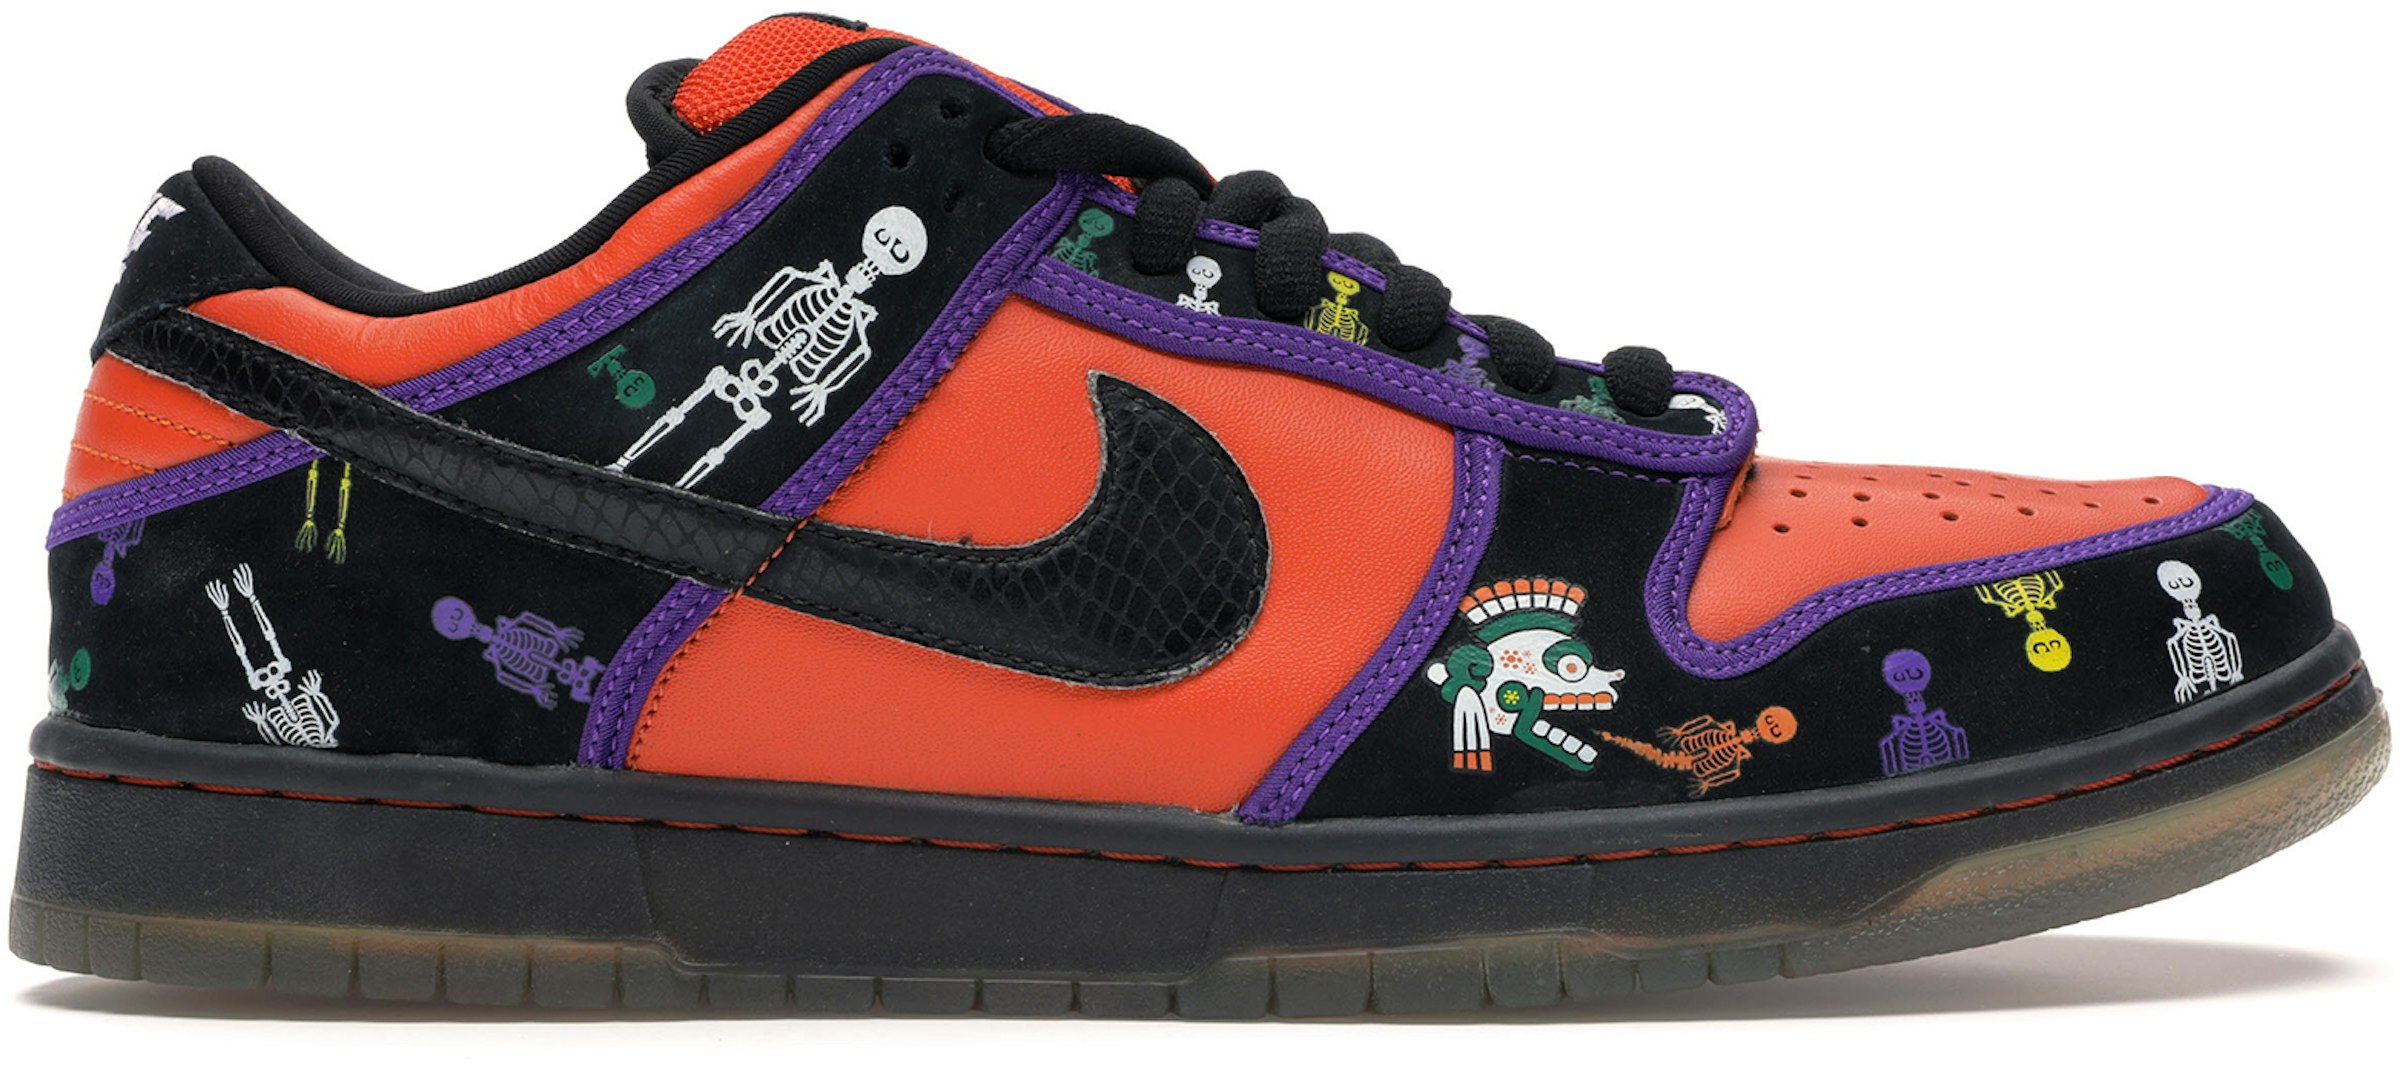 Viaje vehículo Marchitar Nike SB Dunk Low Day of the Dead Men's - 313170-801 - US